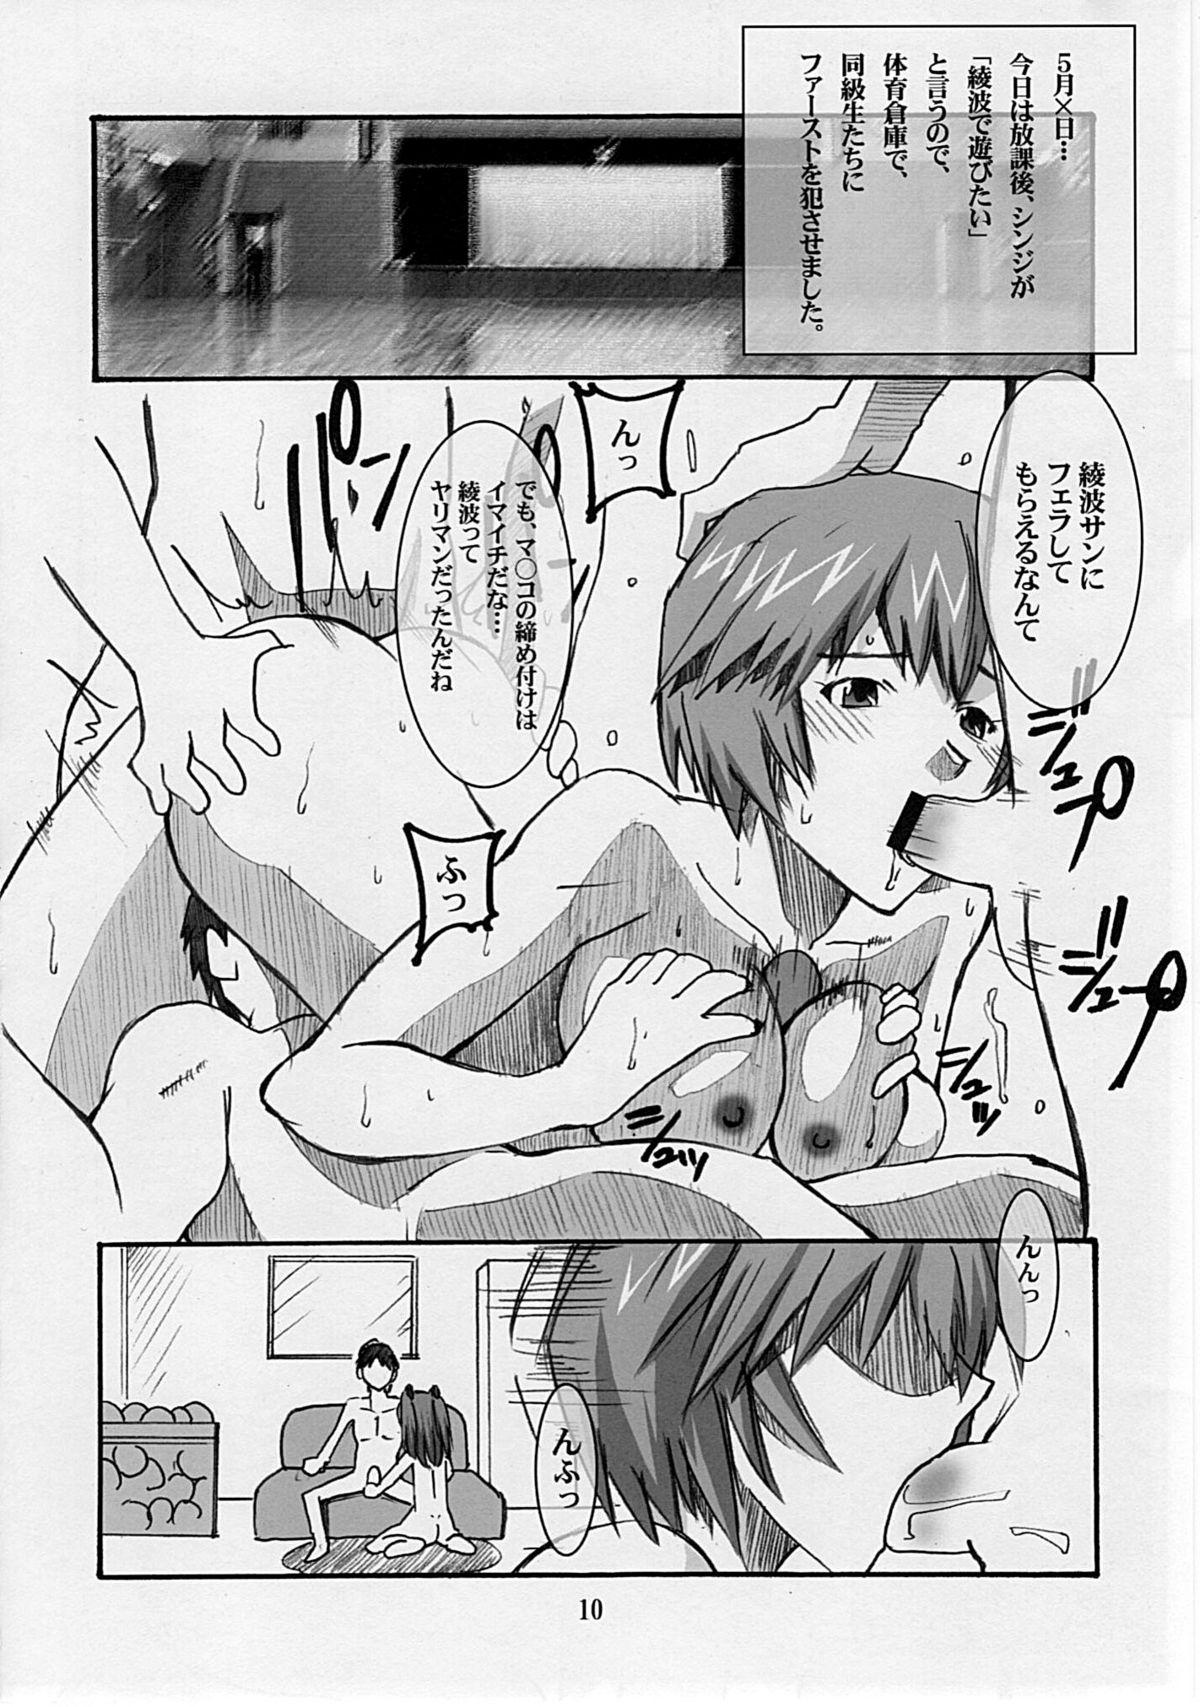 Sex Pussy Asuka's Diary 01 - Neon genesis evangelion Amateur Pussy - Page 9